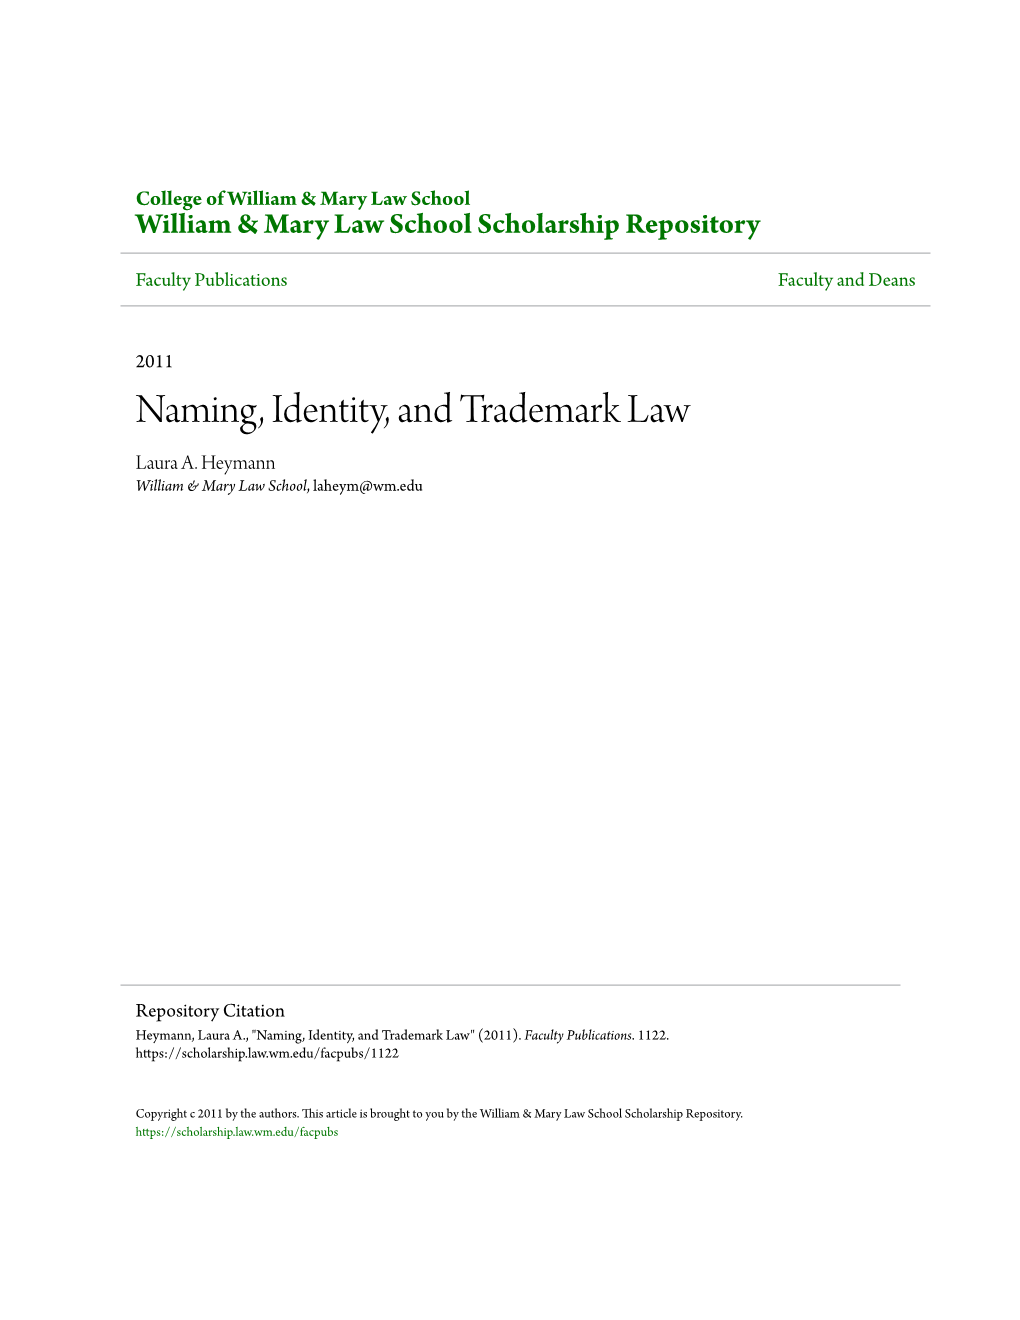 Naming, Identity, and Trademark Law Laura A